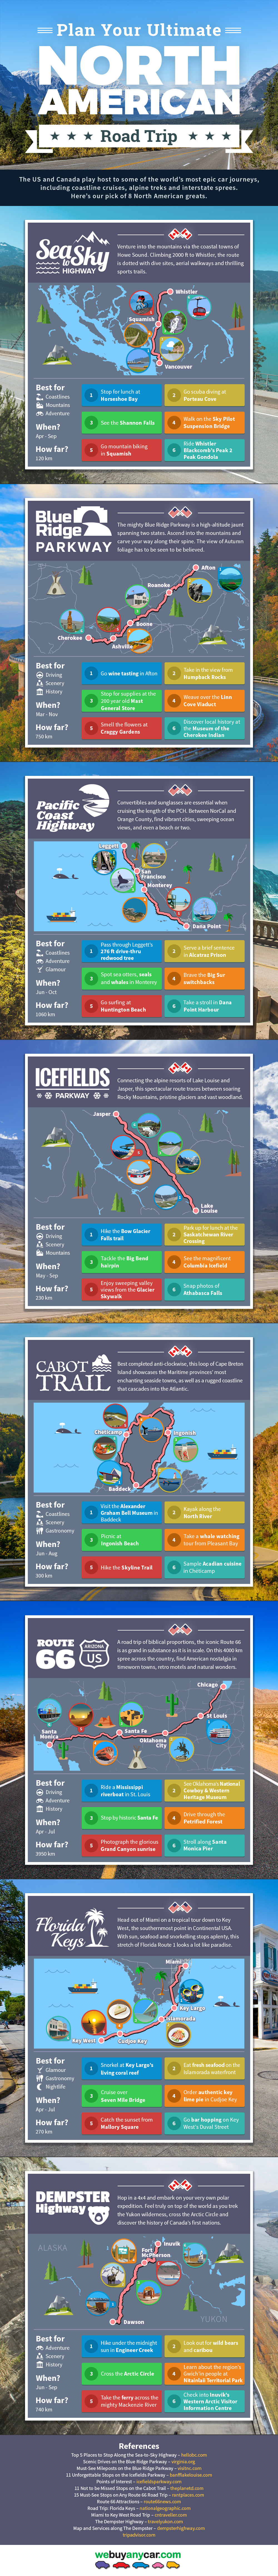 A Guide To The Ultimate North American Road Trip - Infographic